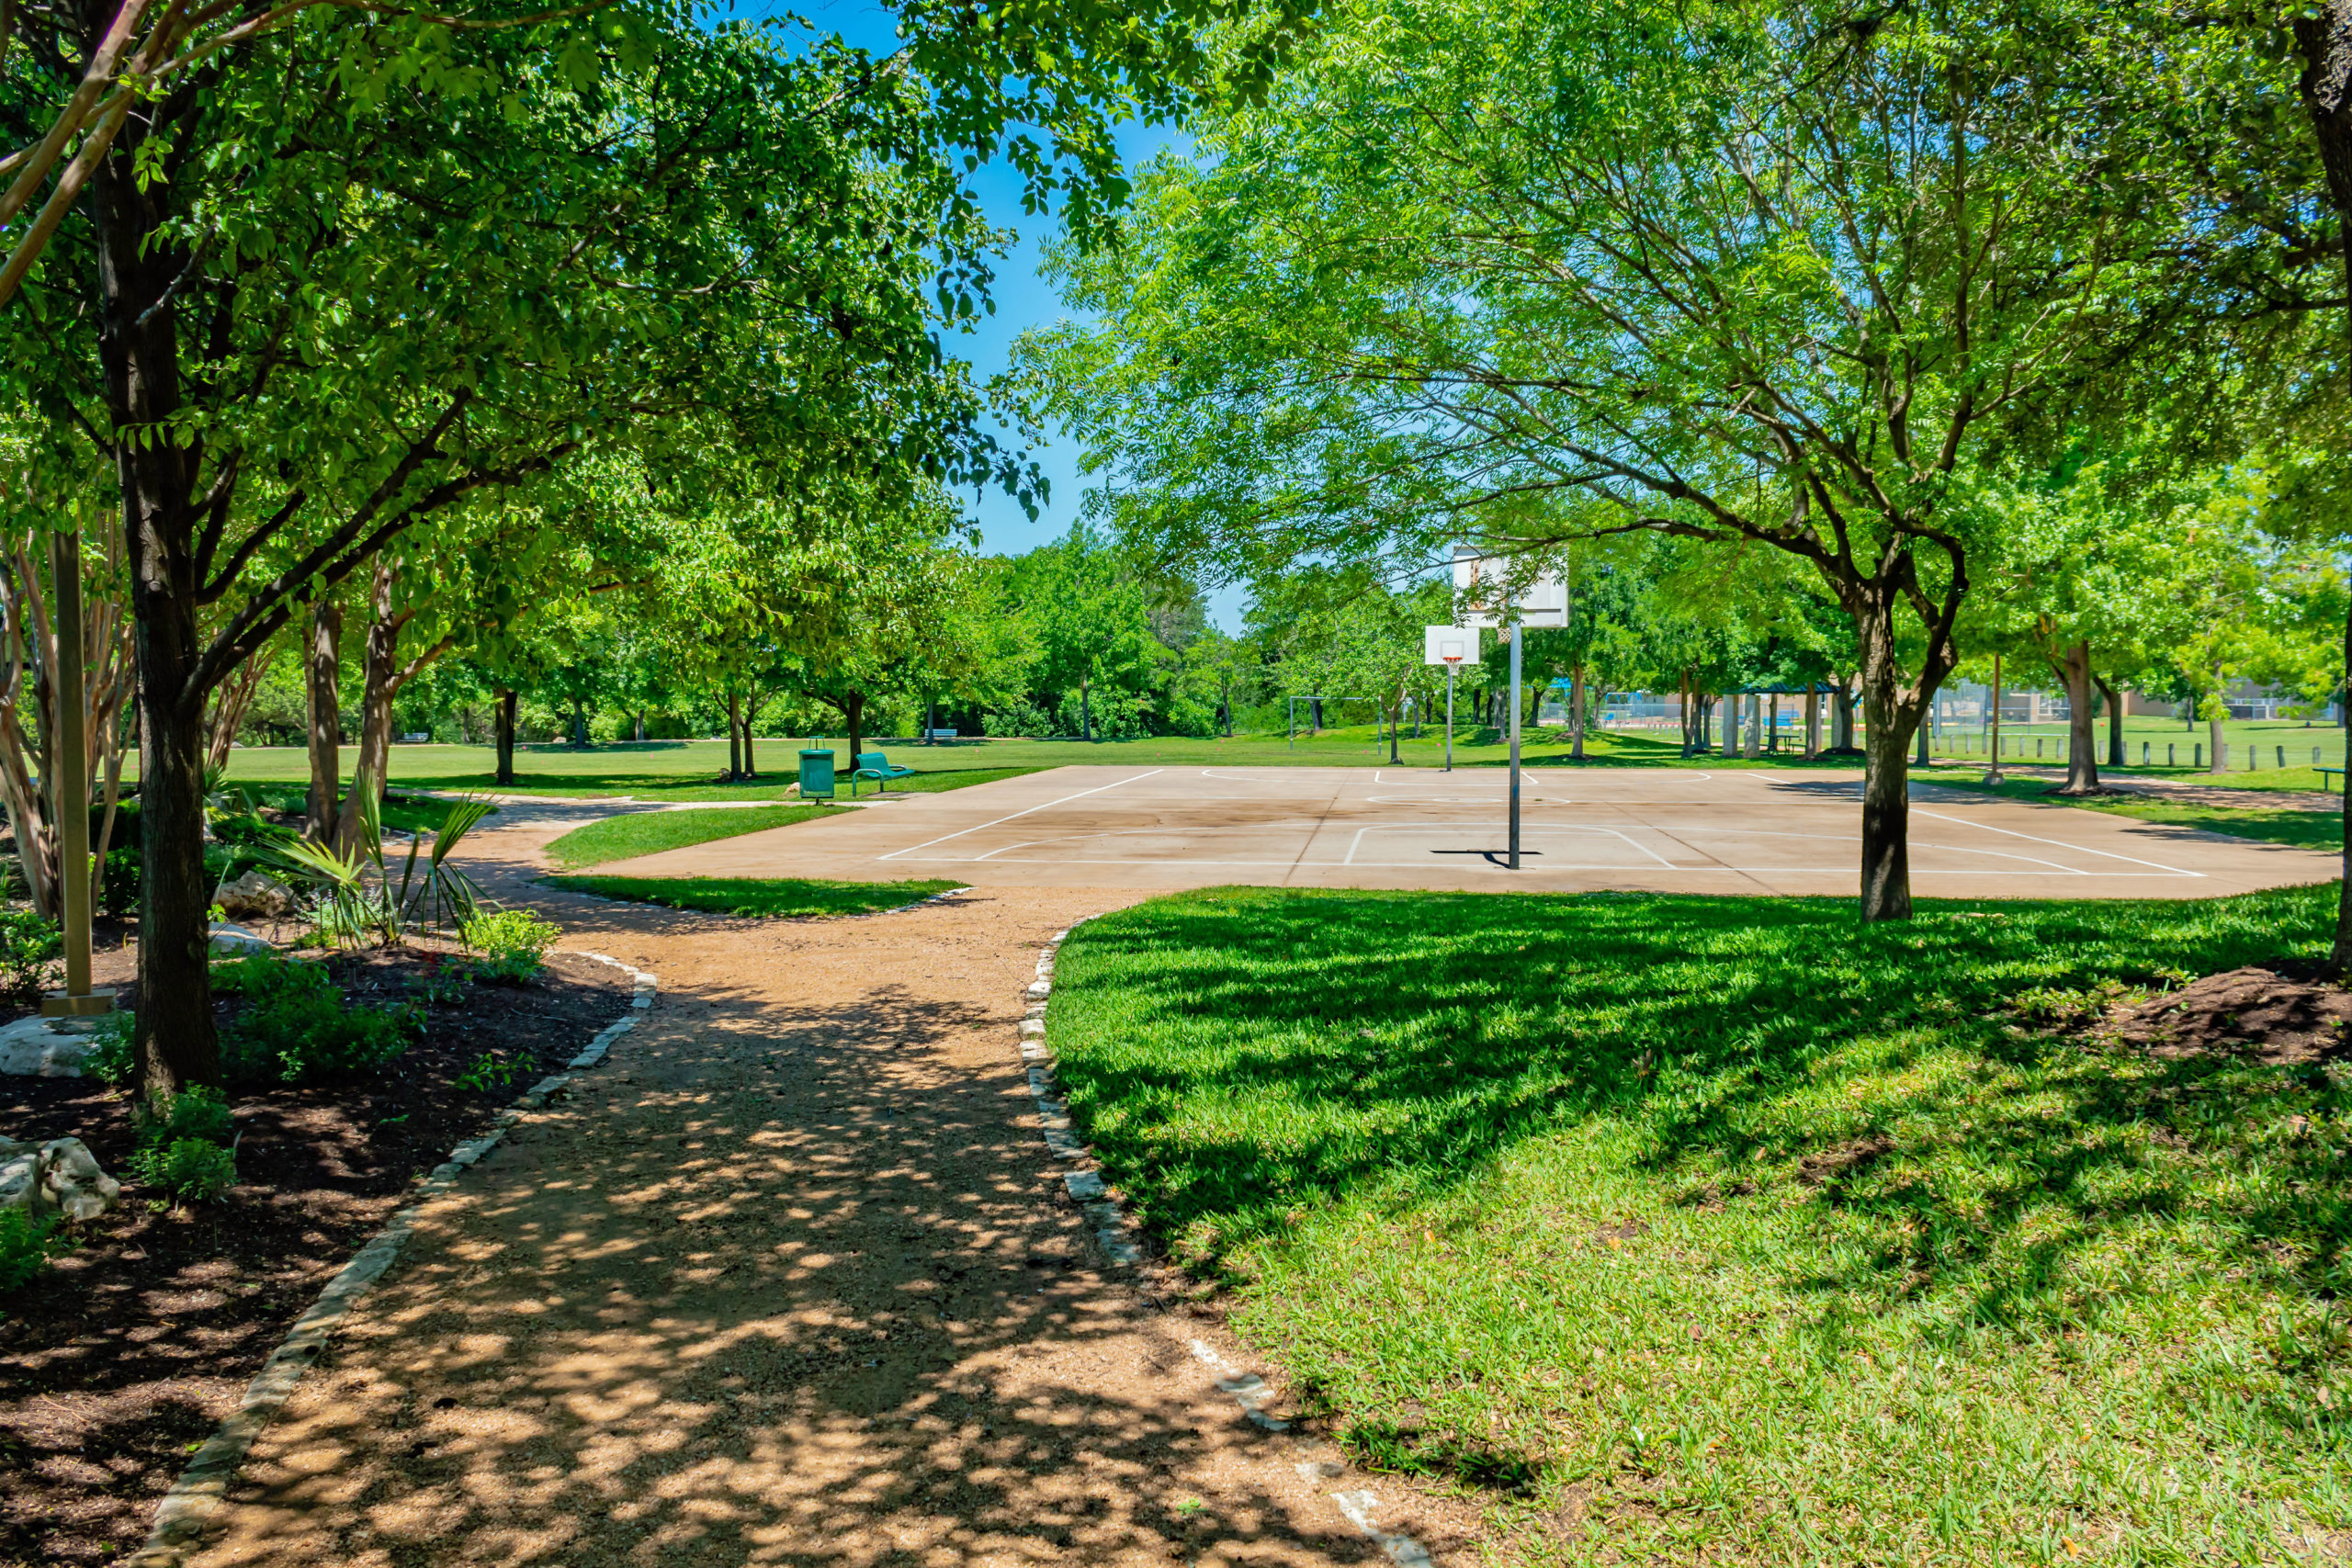 Picture of a gravel walking path leading to a basketball court.